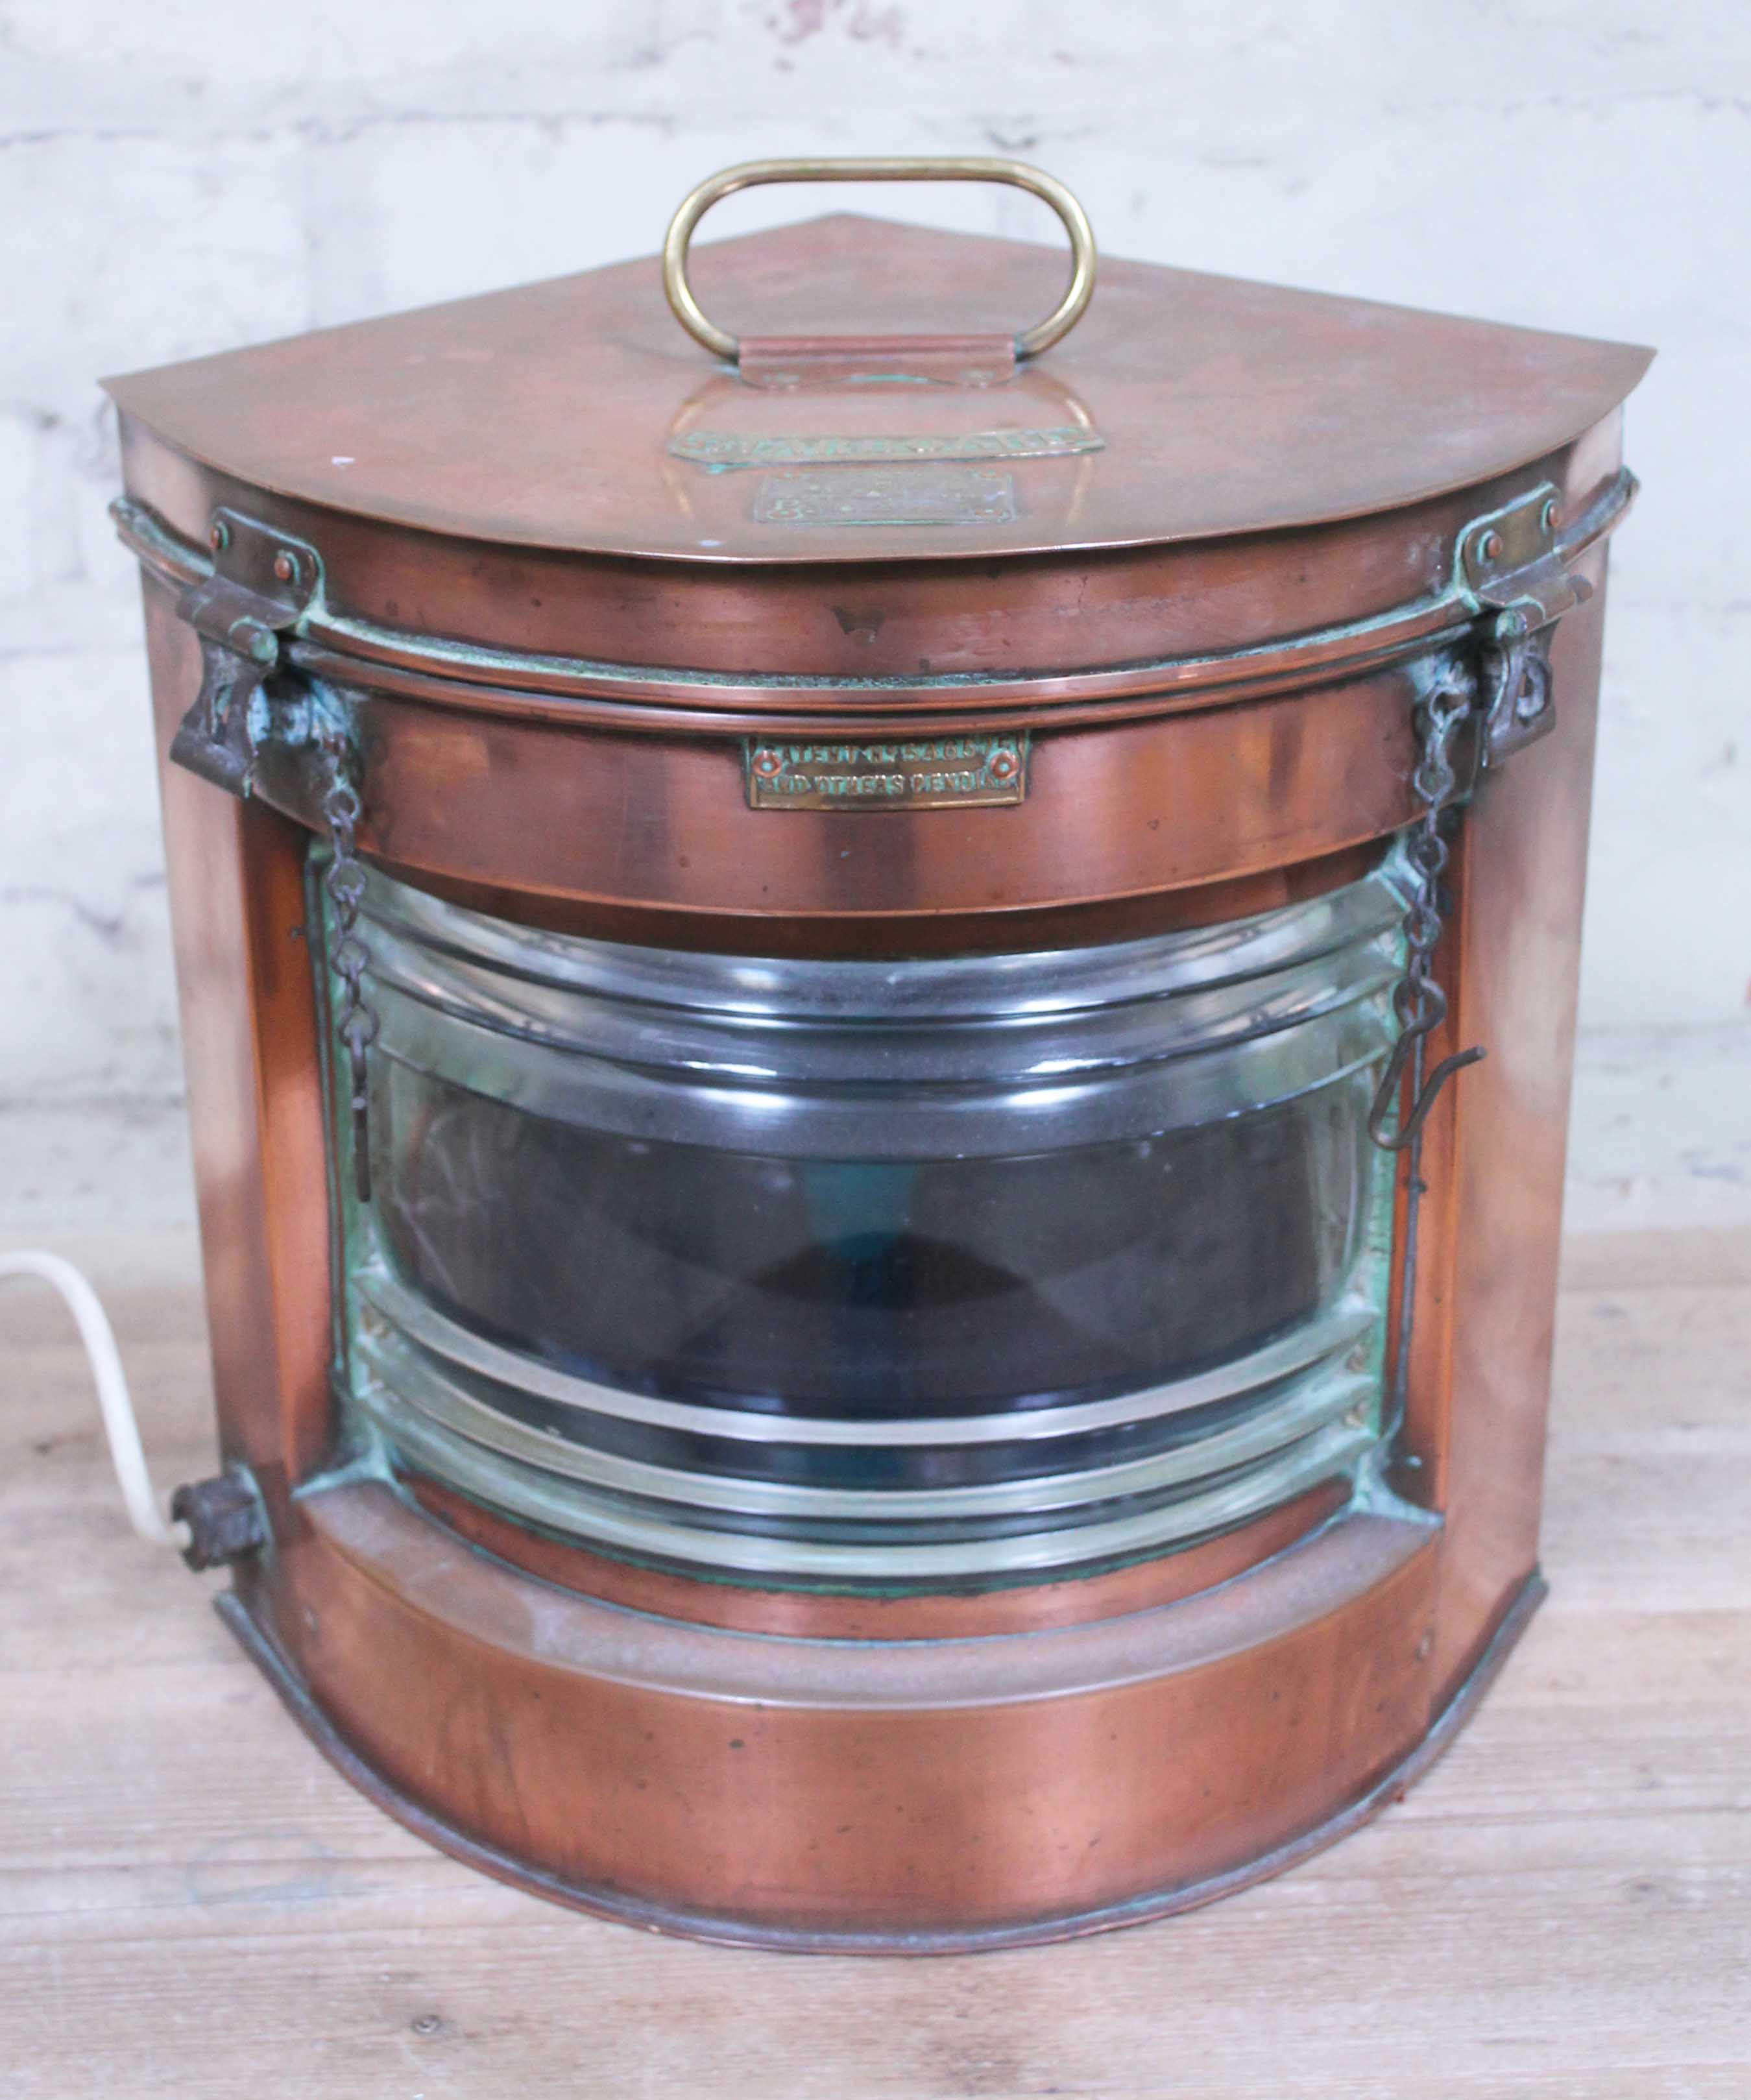 A Seahorse copper starboard light. Condition - converted to electric.